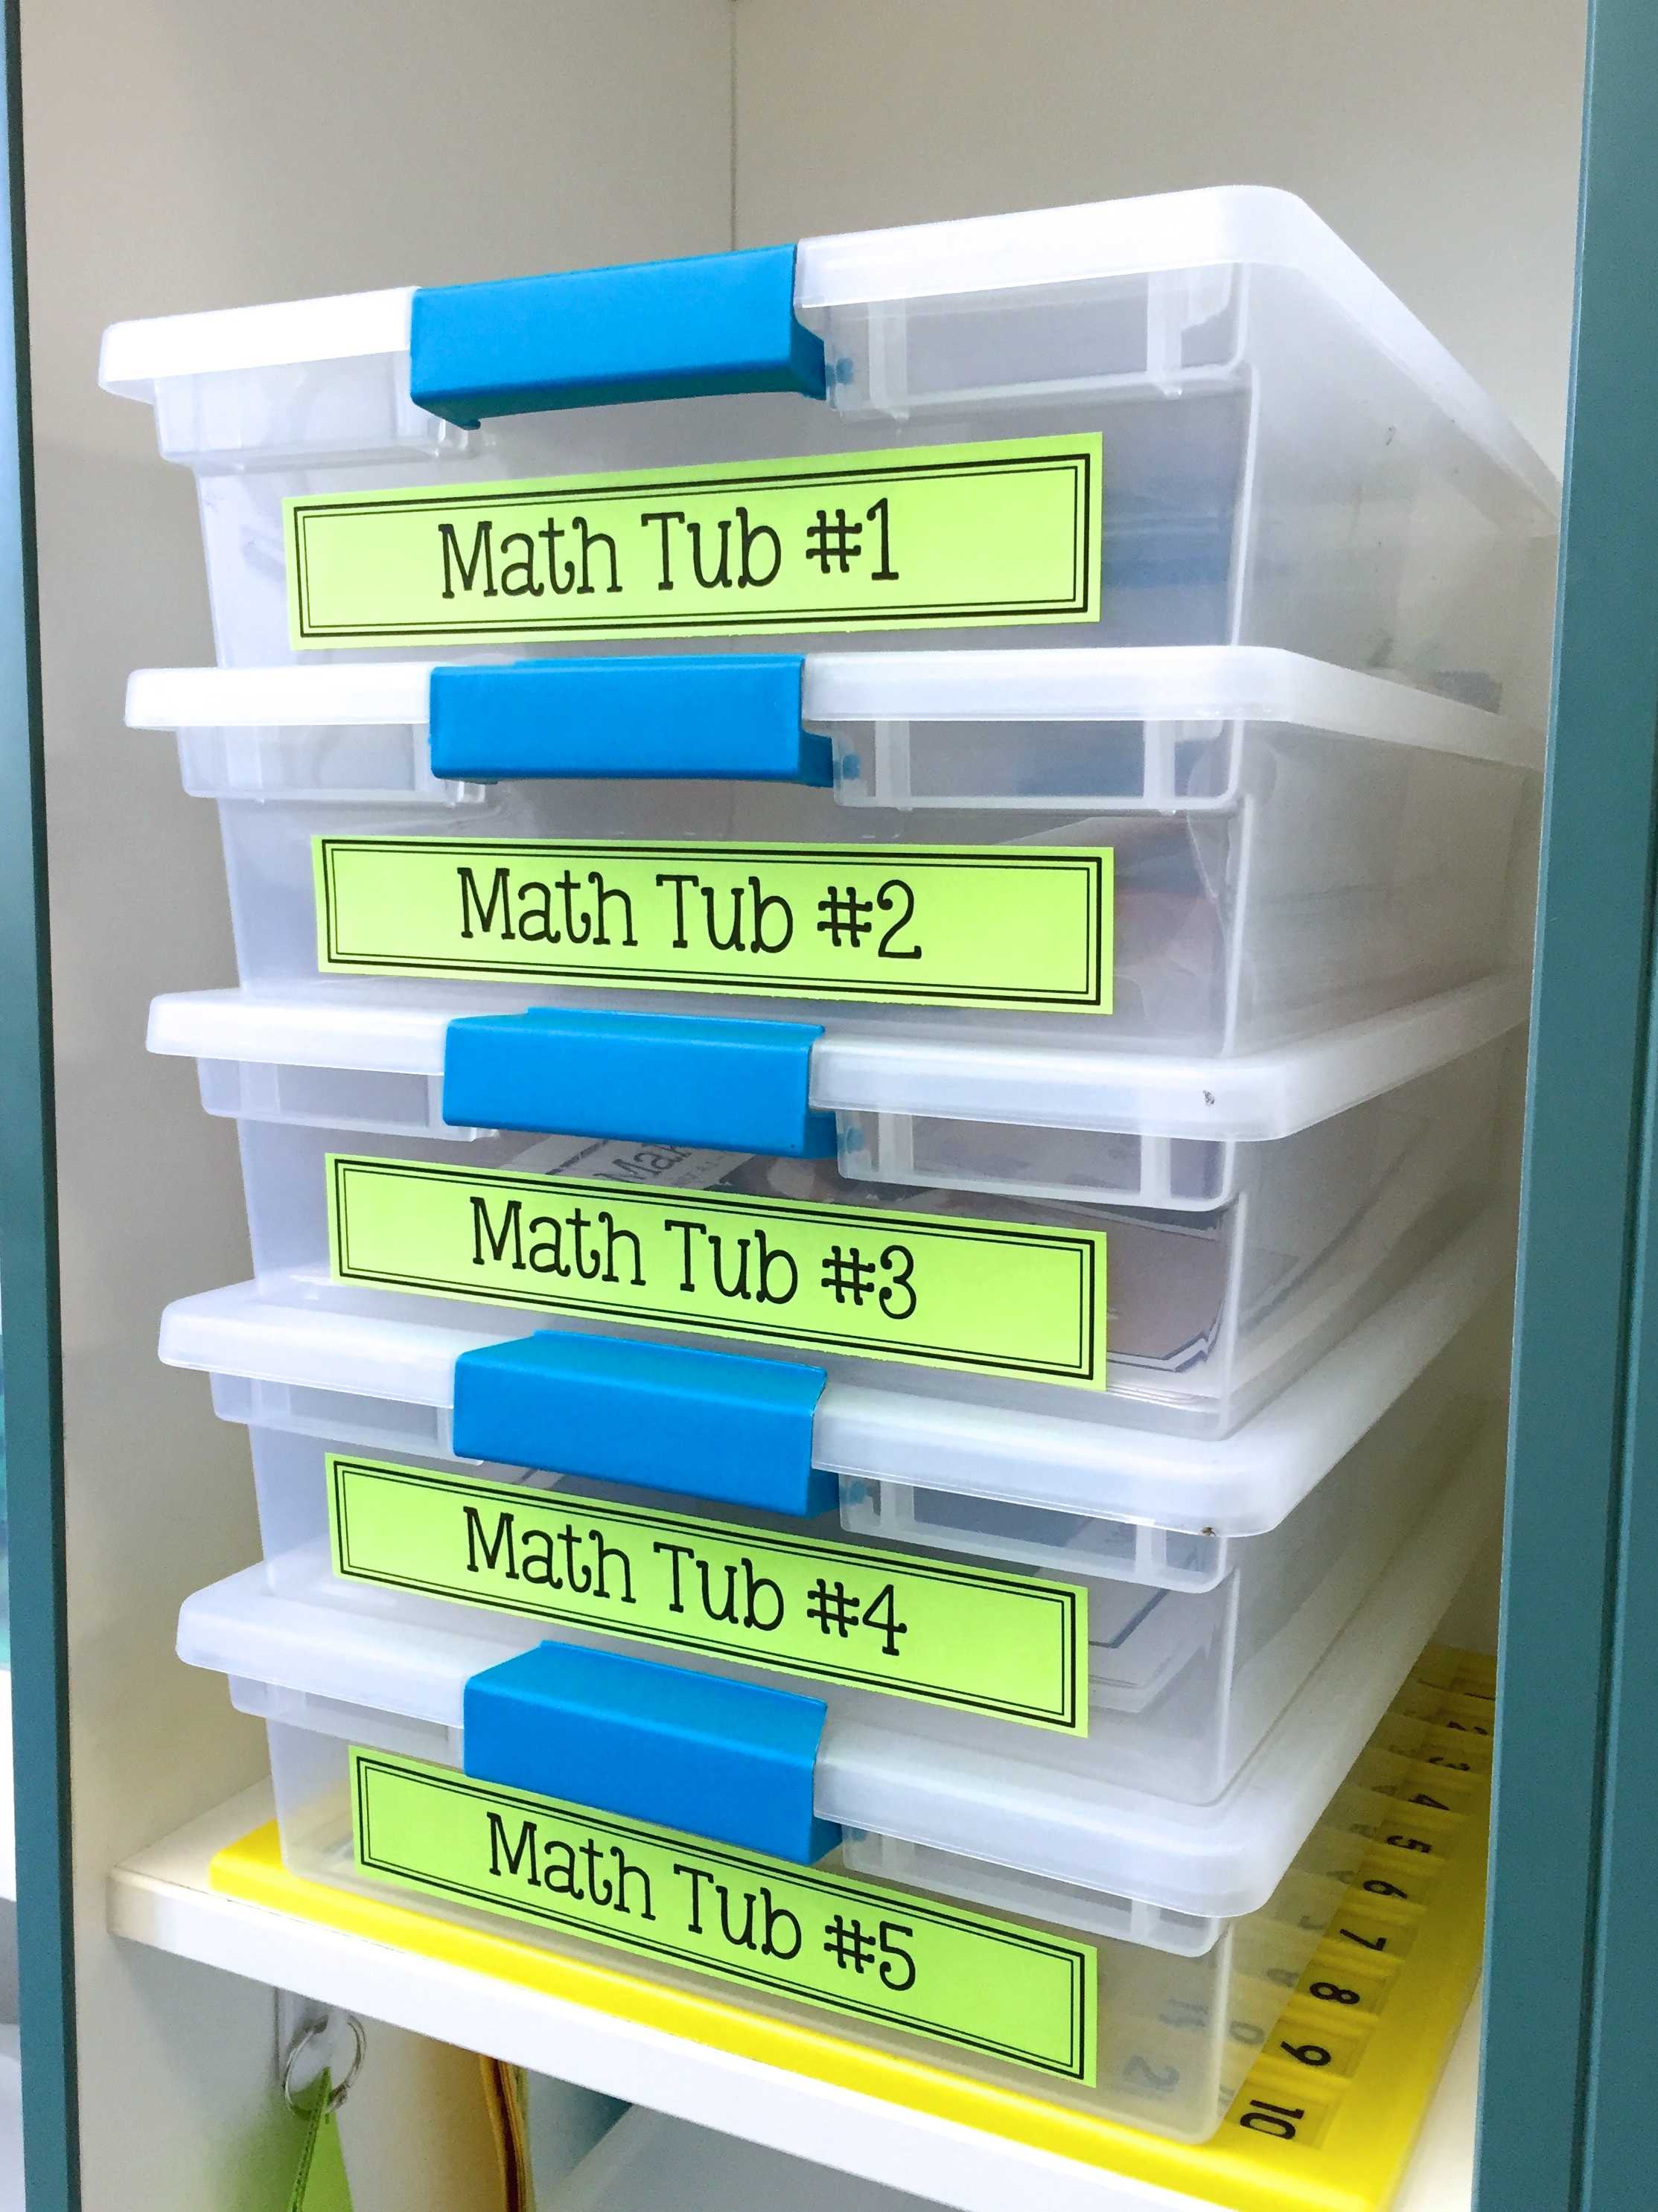 Overwhelmed by math centers? Check out these SIMPLE ideas for create predictable patterns and routines that allow for streamlined planning! 